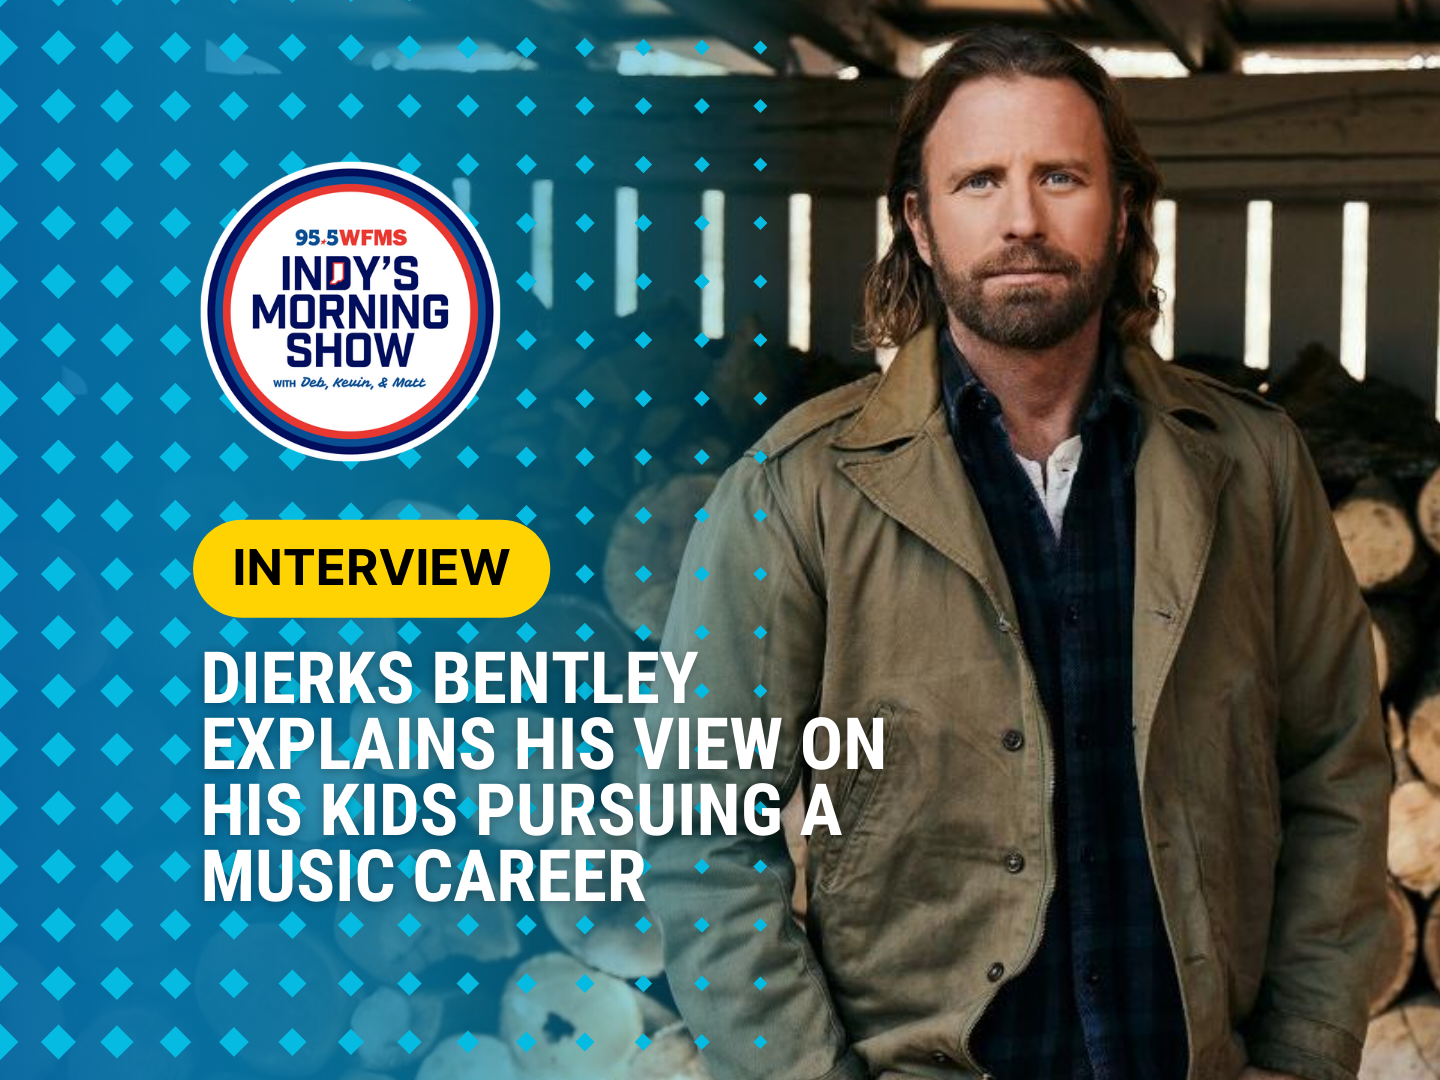 Dierks Bentley Hangs With Indy’s Morning Show